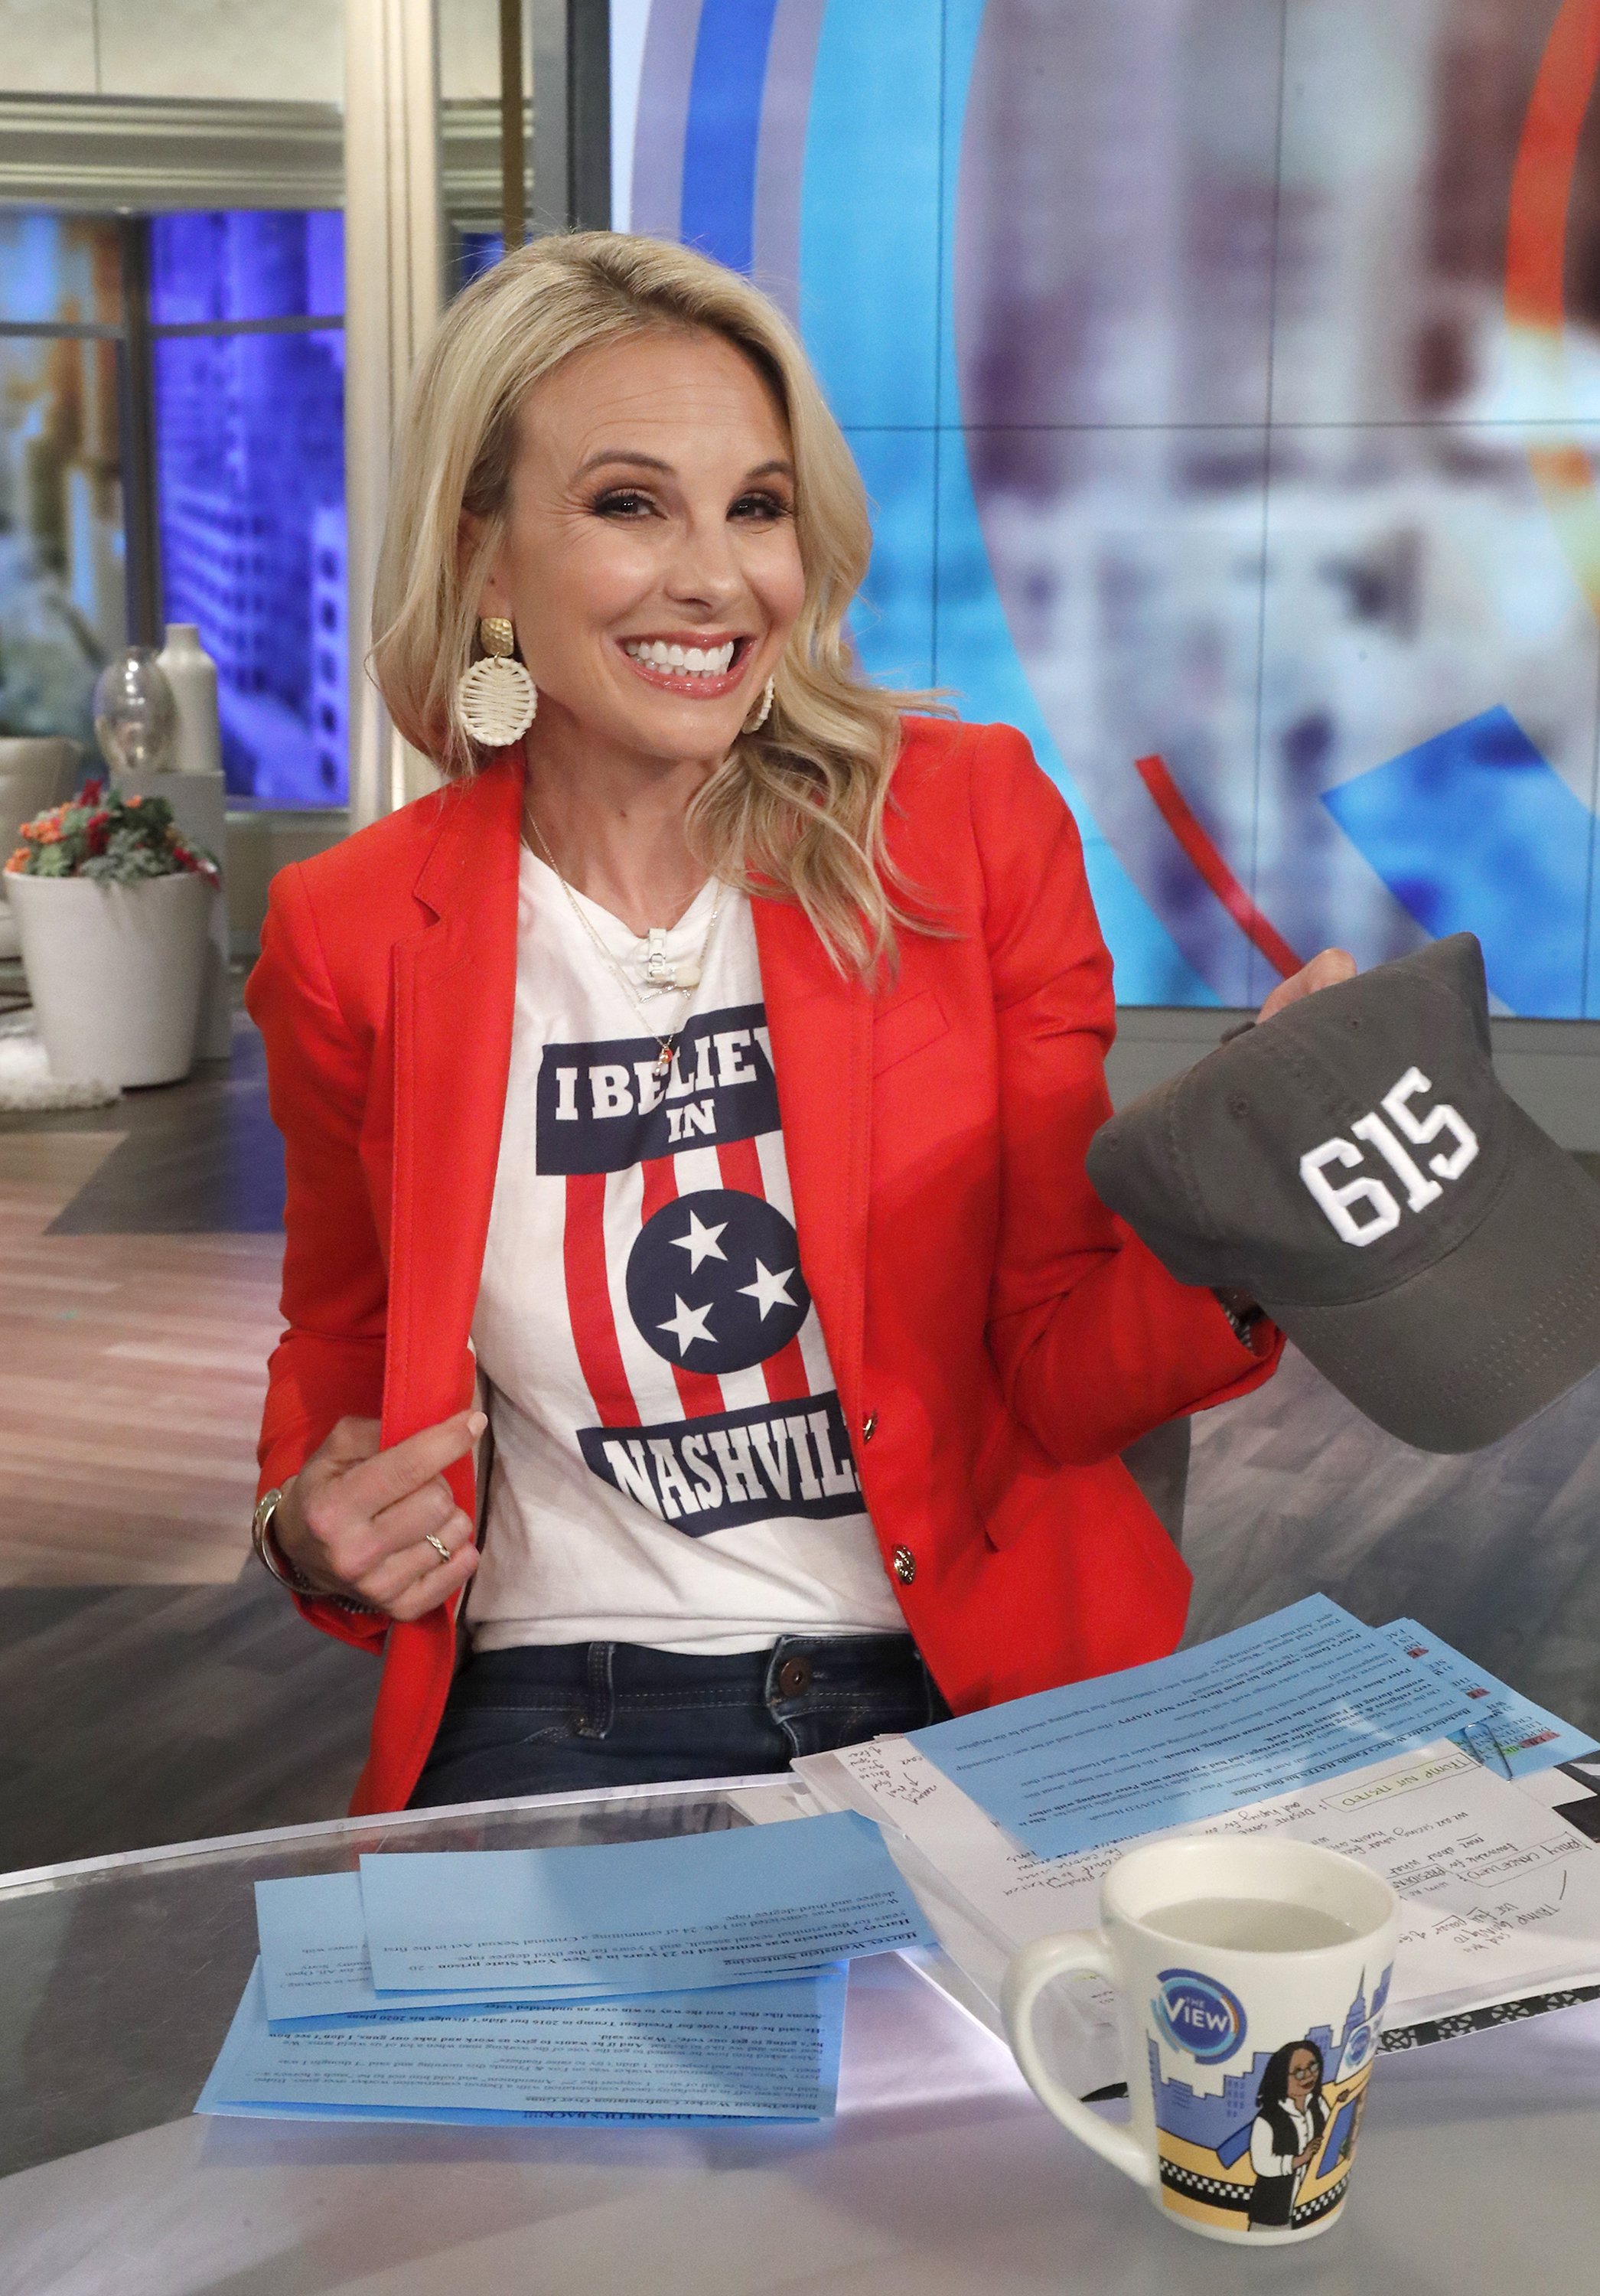 Elisabeth Hasselbeck on "The Talk" shooting without an audience due to concerns over coronavirus on Wednesday, March 11, 2020 | Photo: GettyImages